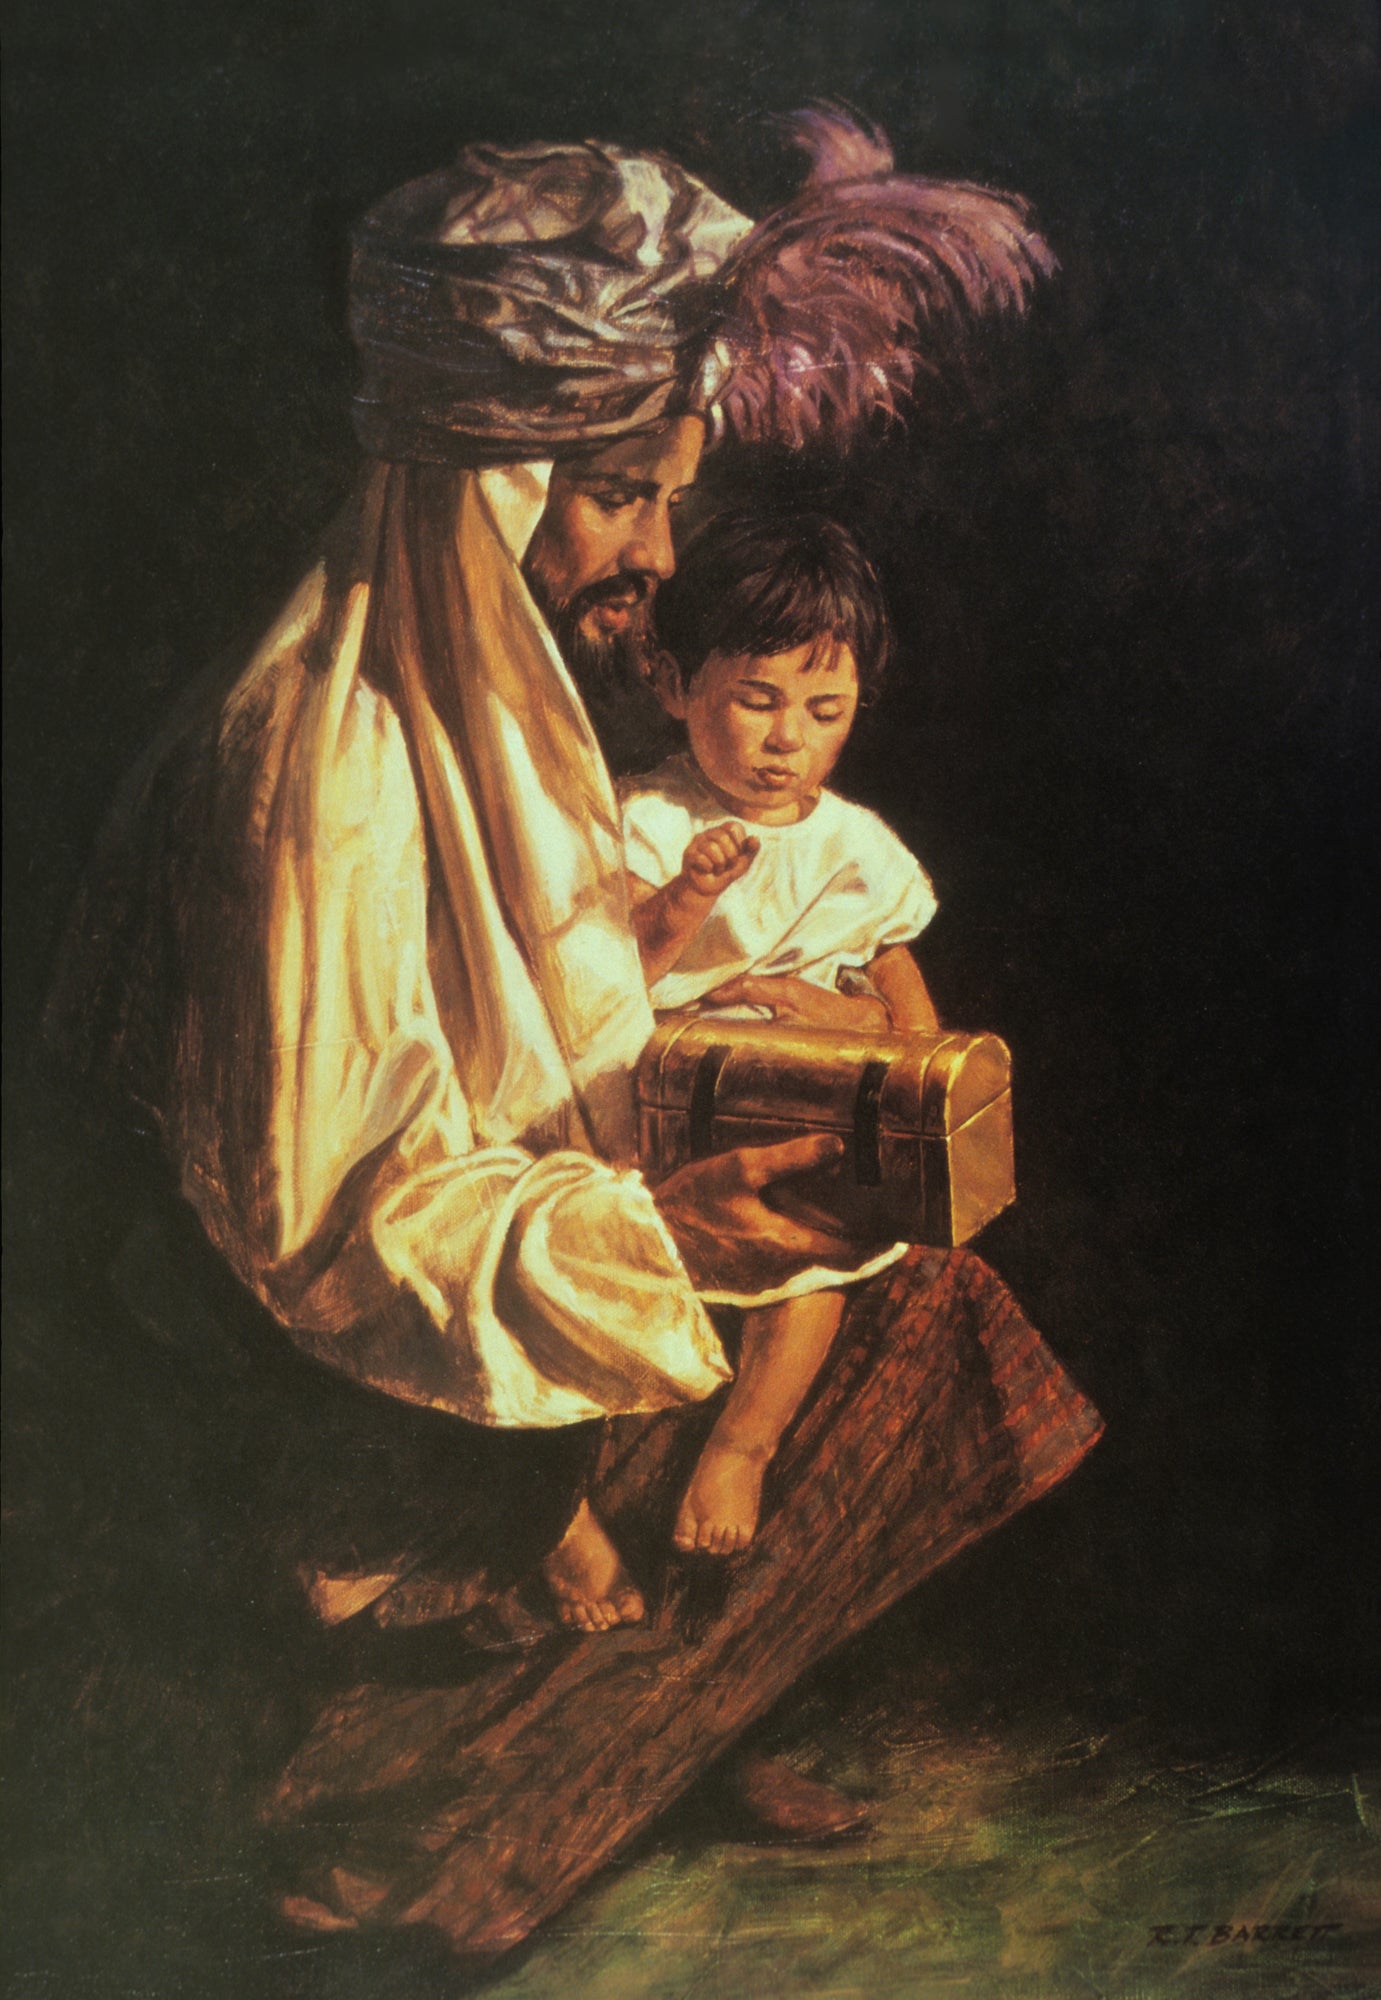 Young Christ with a Wiseman by Robert Barrett